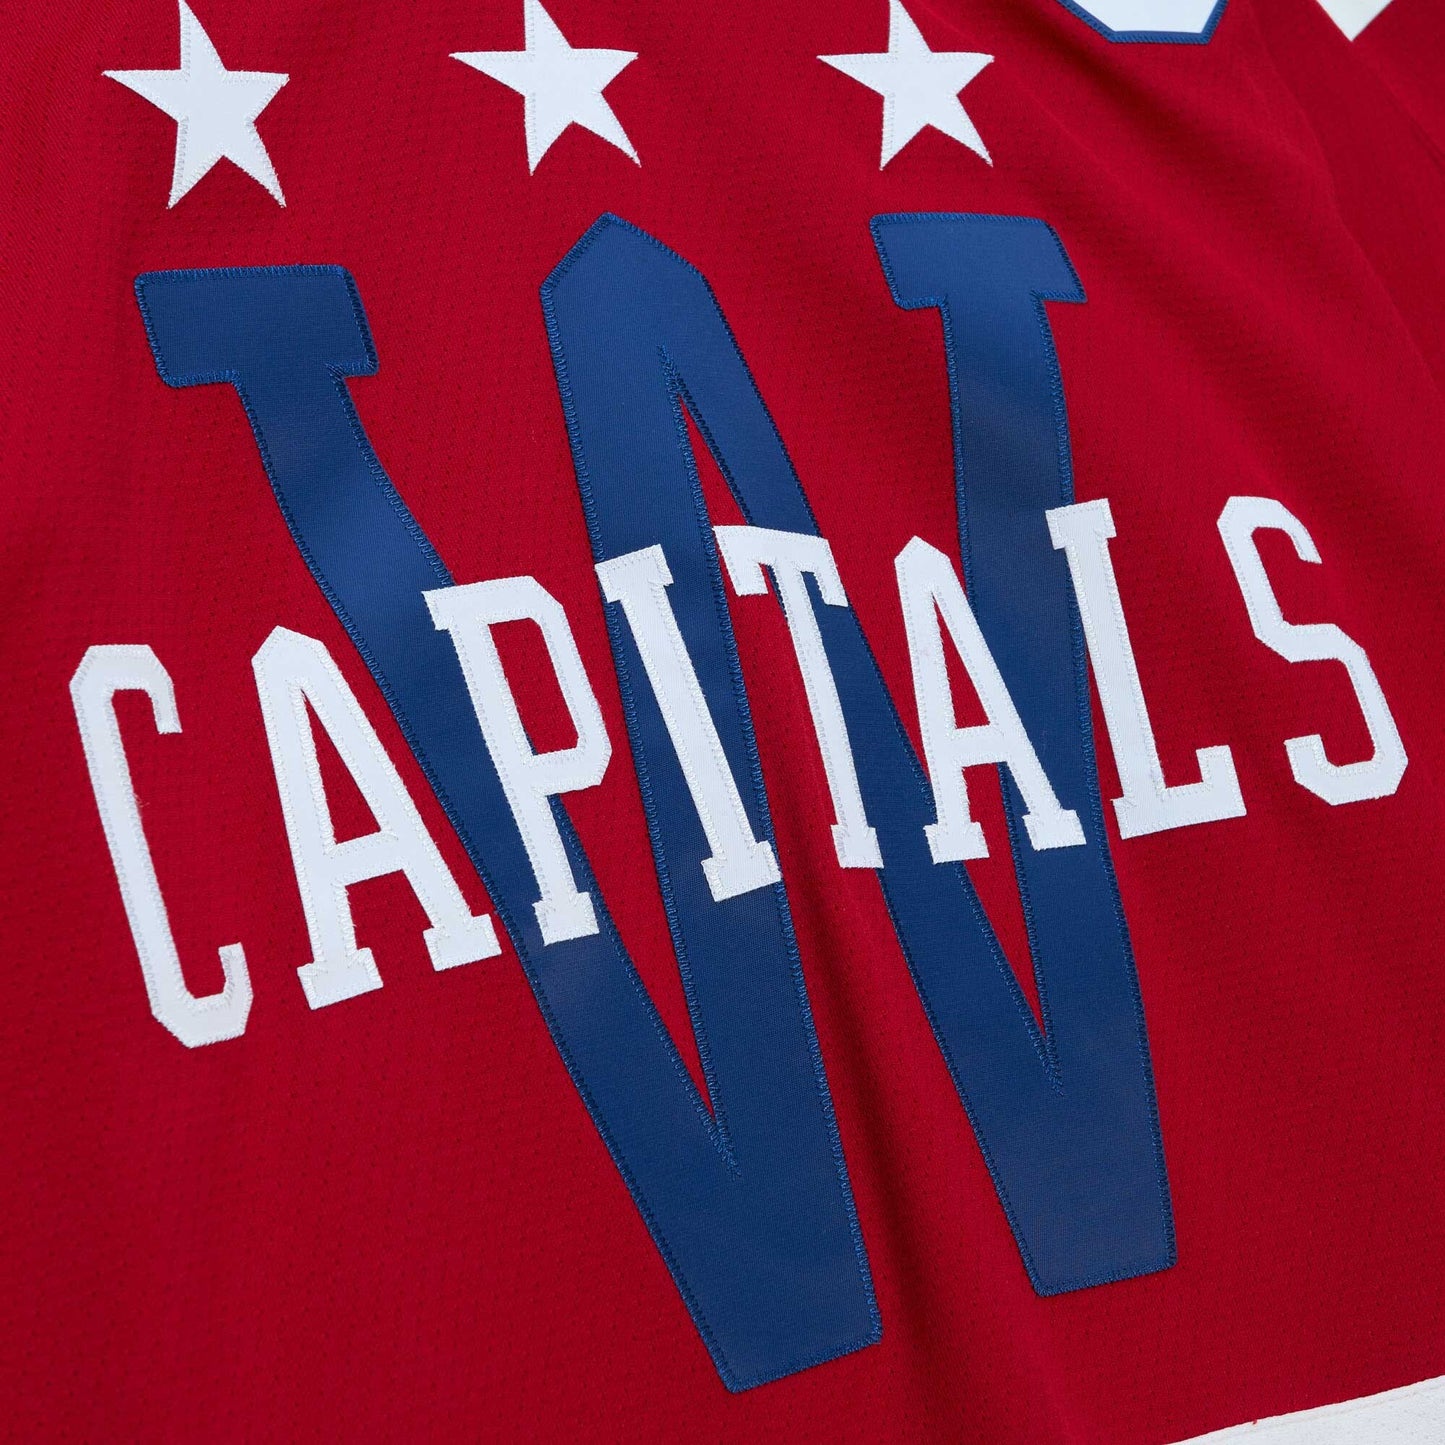 Men's Washington Capitals Alexander Ovechkin Mitchell & Ness Red 2015 Captain Patch Blue Line Player Jersey